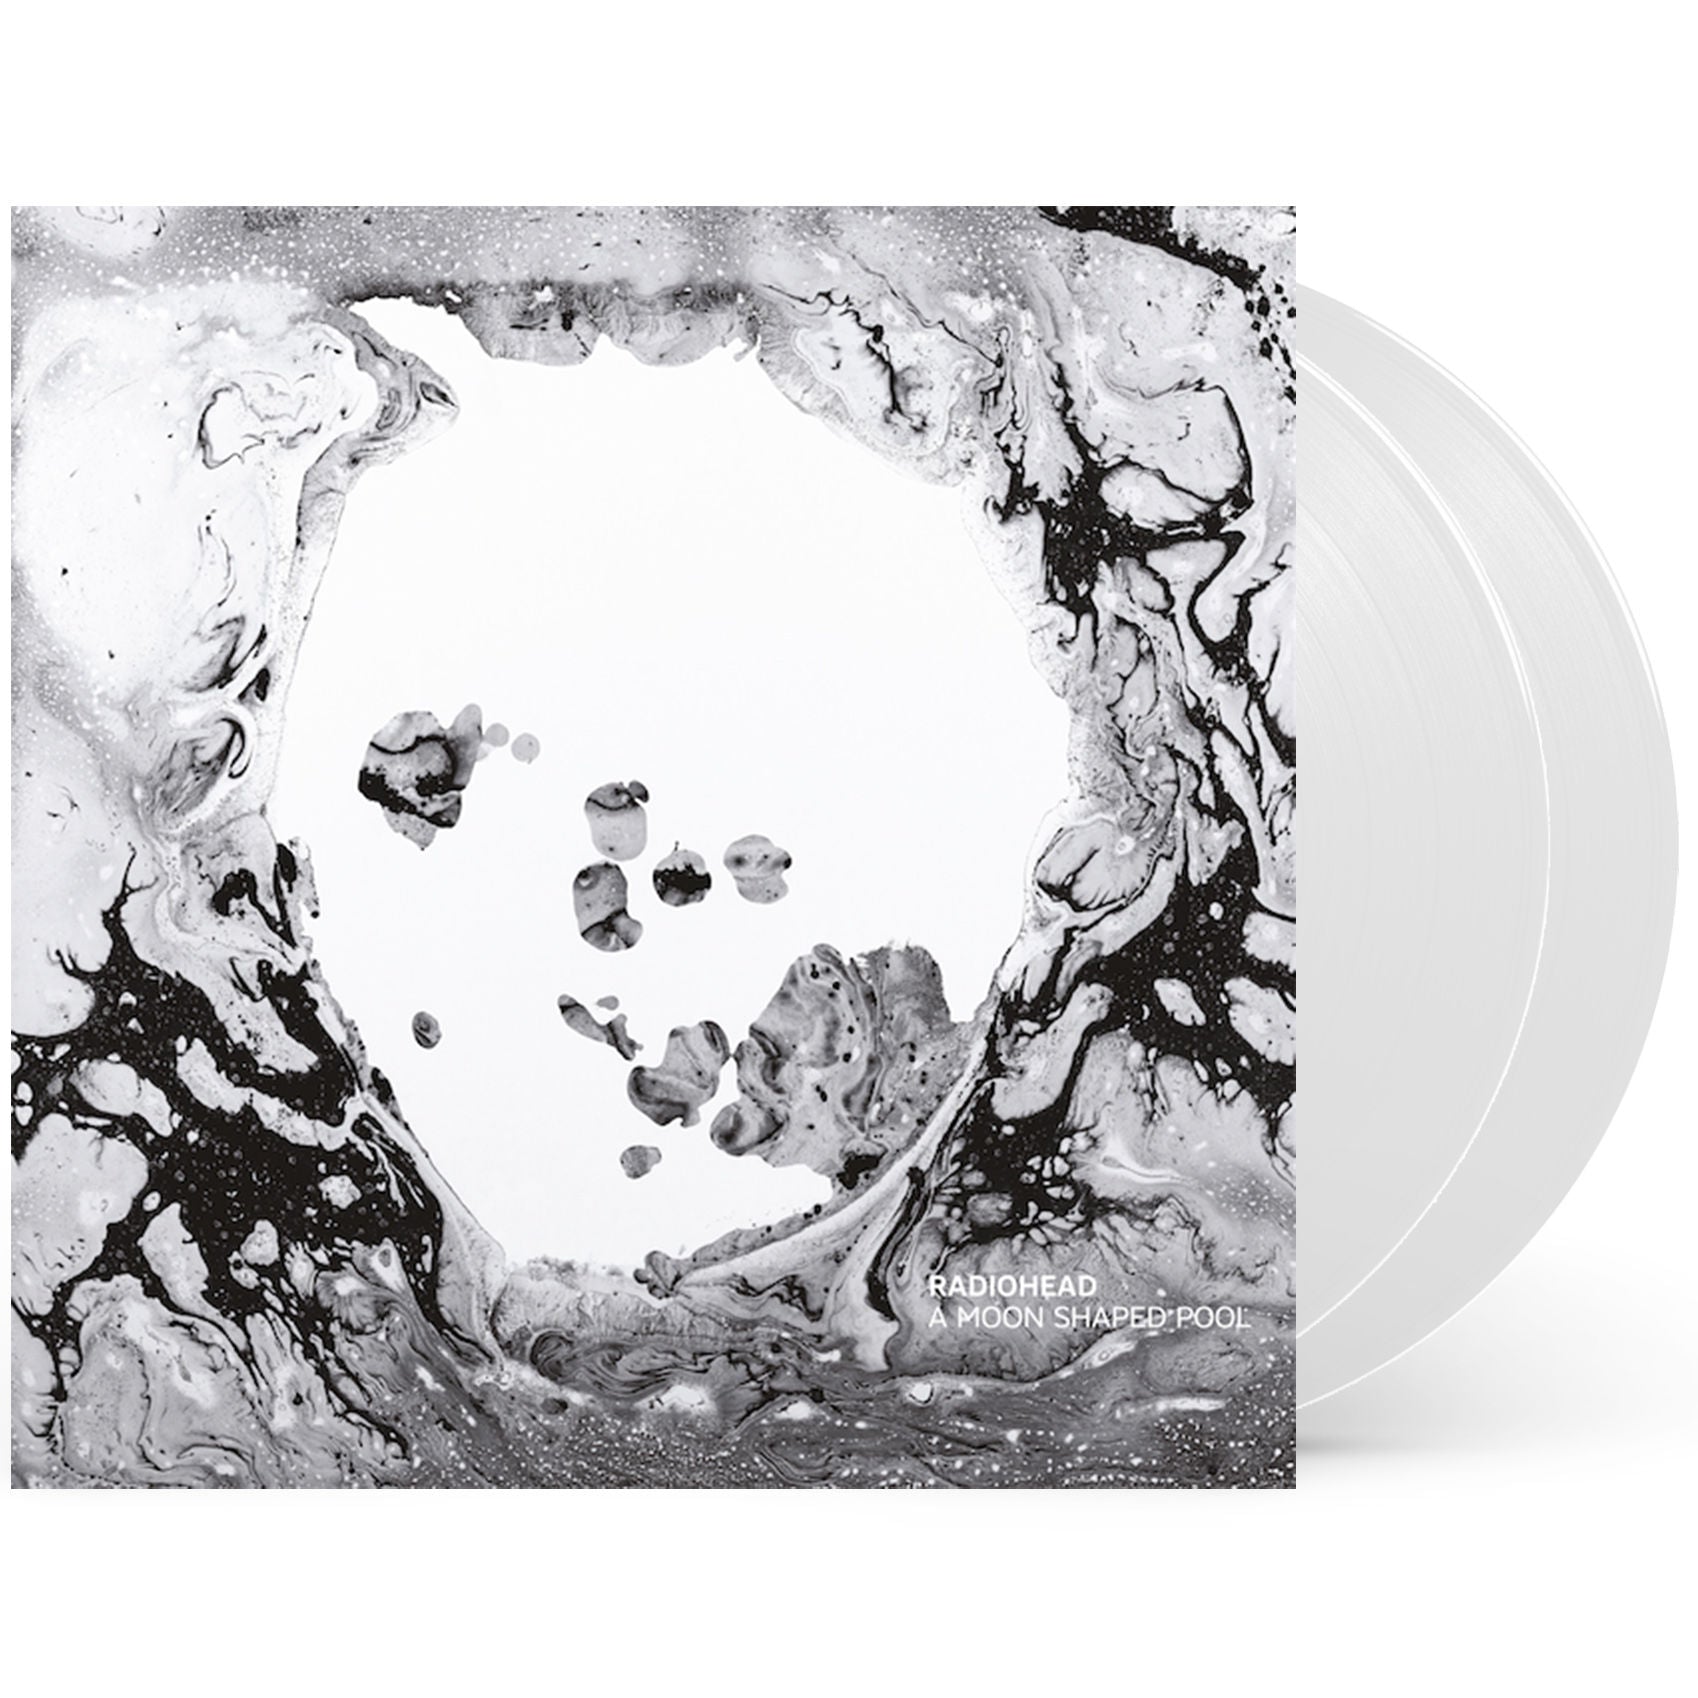 A Moon Shaped Pool: Limited Edition Opaque White Vinyl 2LP